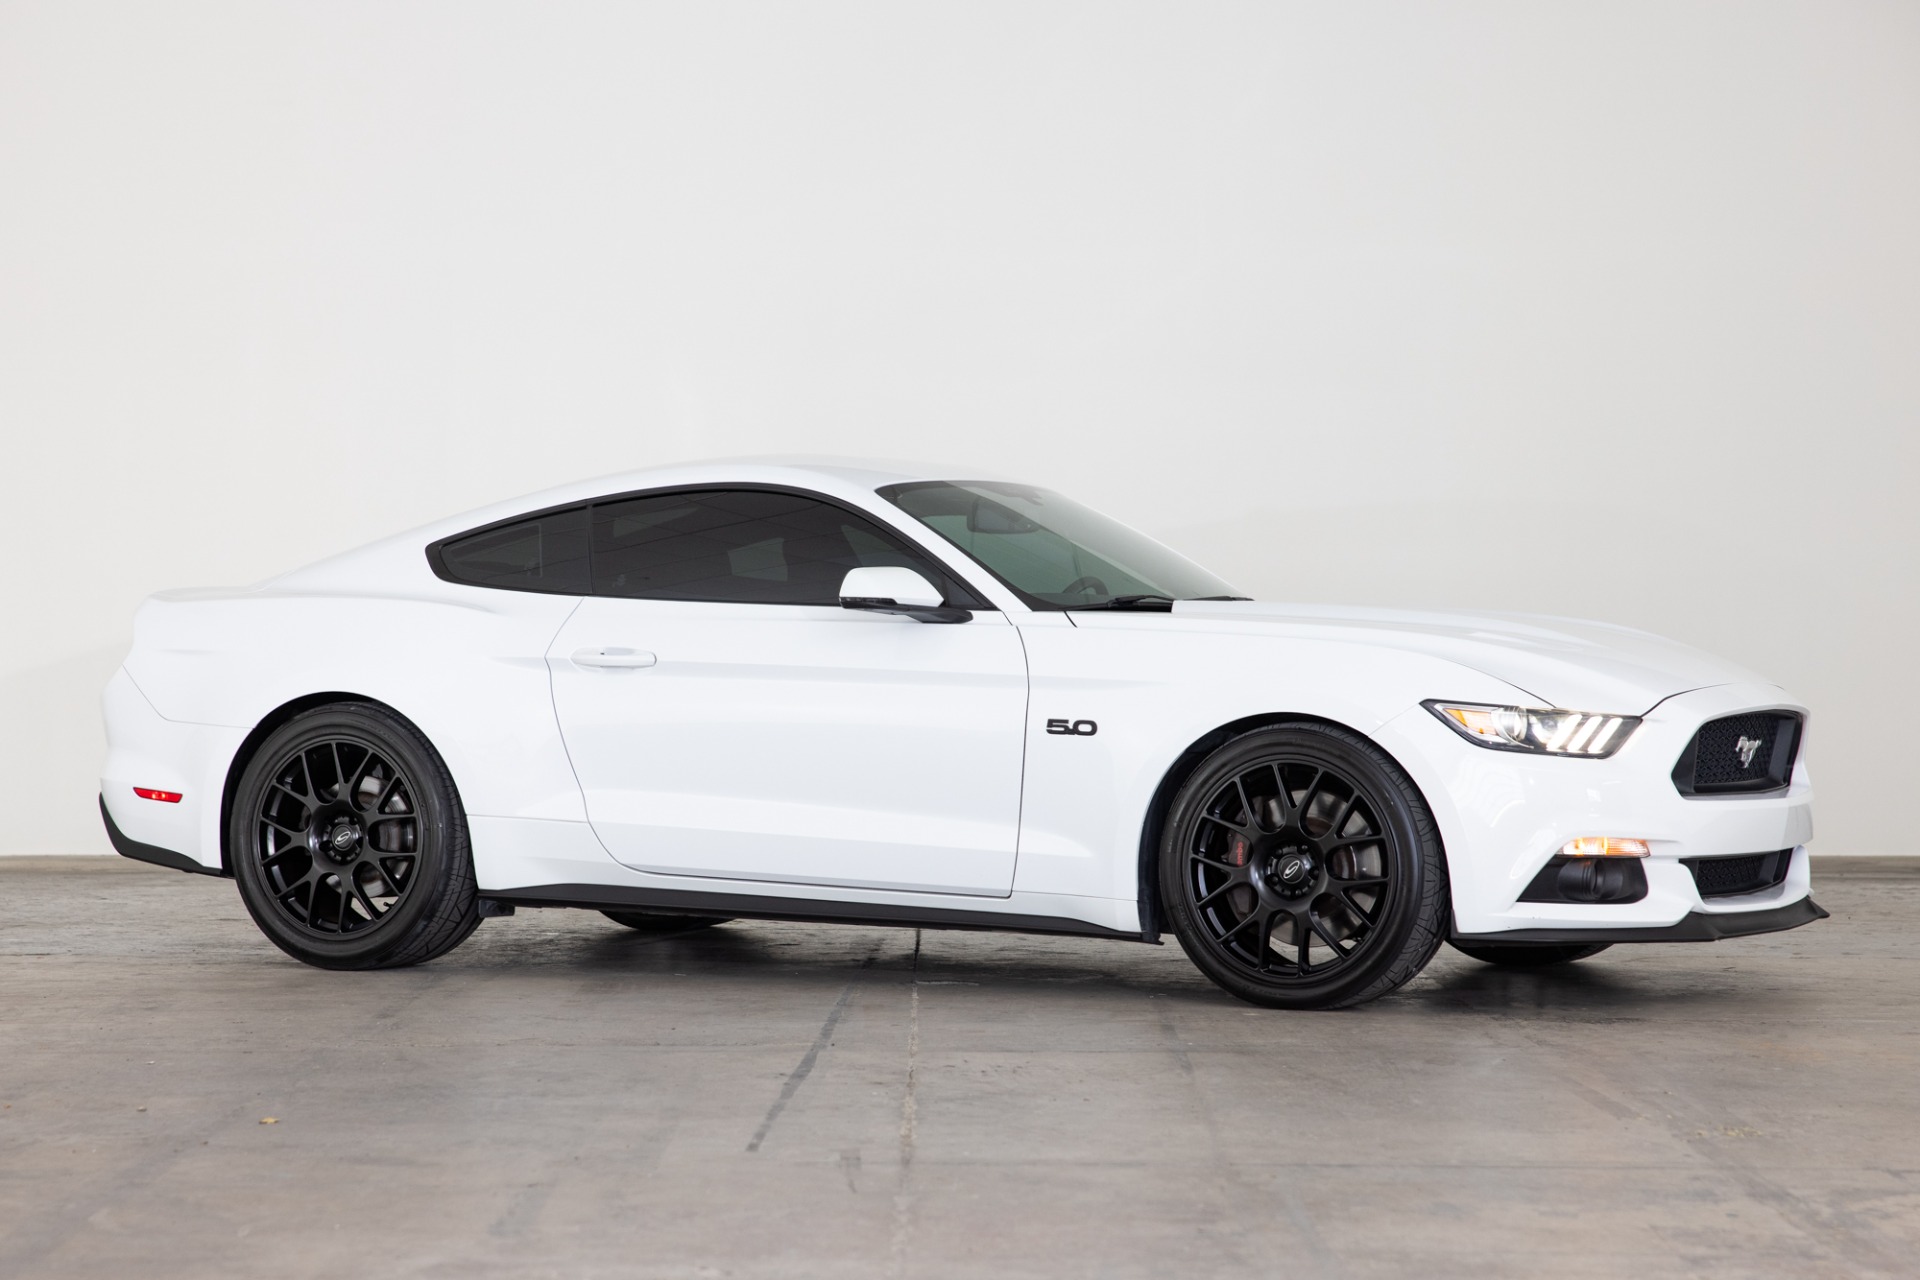 2015 Roush Mustang: Even More Agression - The Car Guide